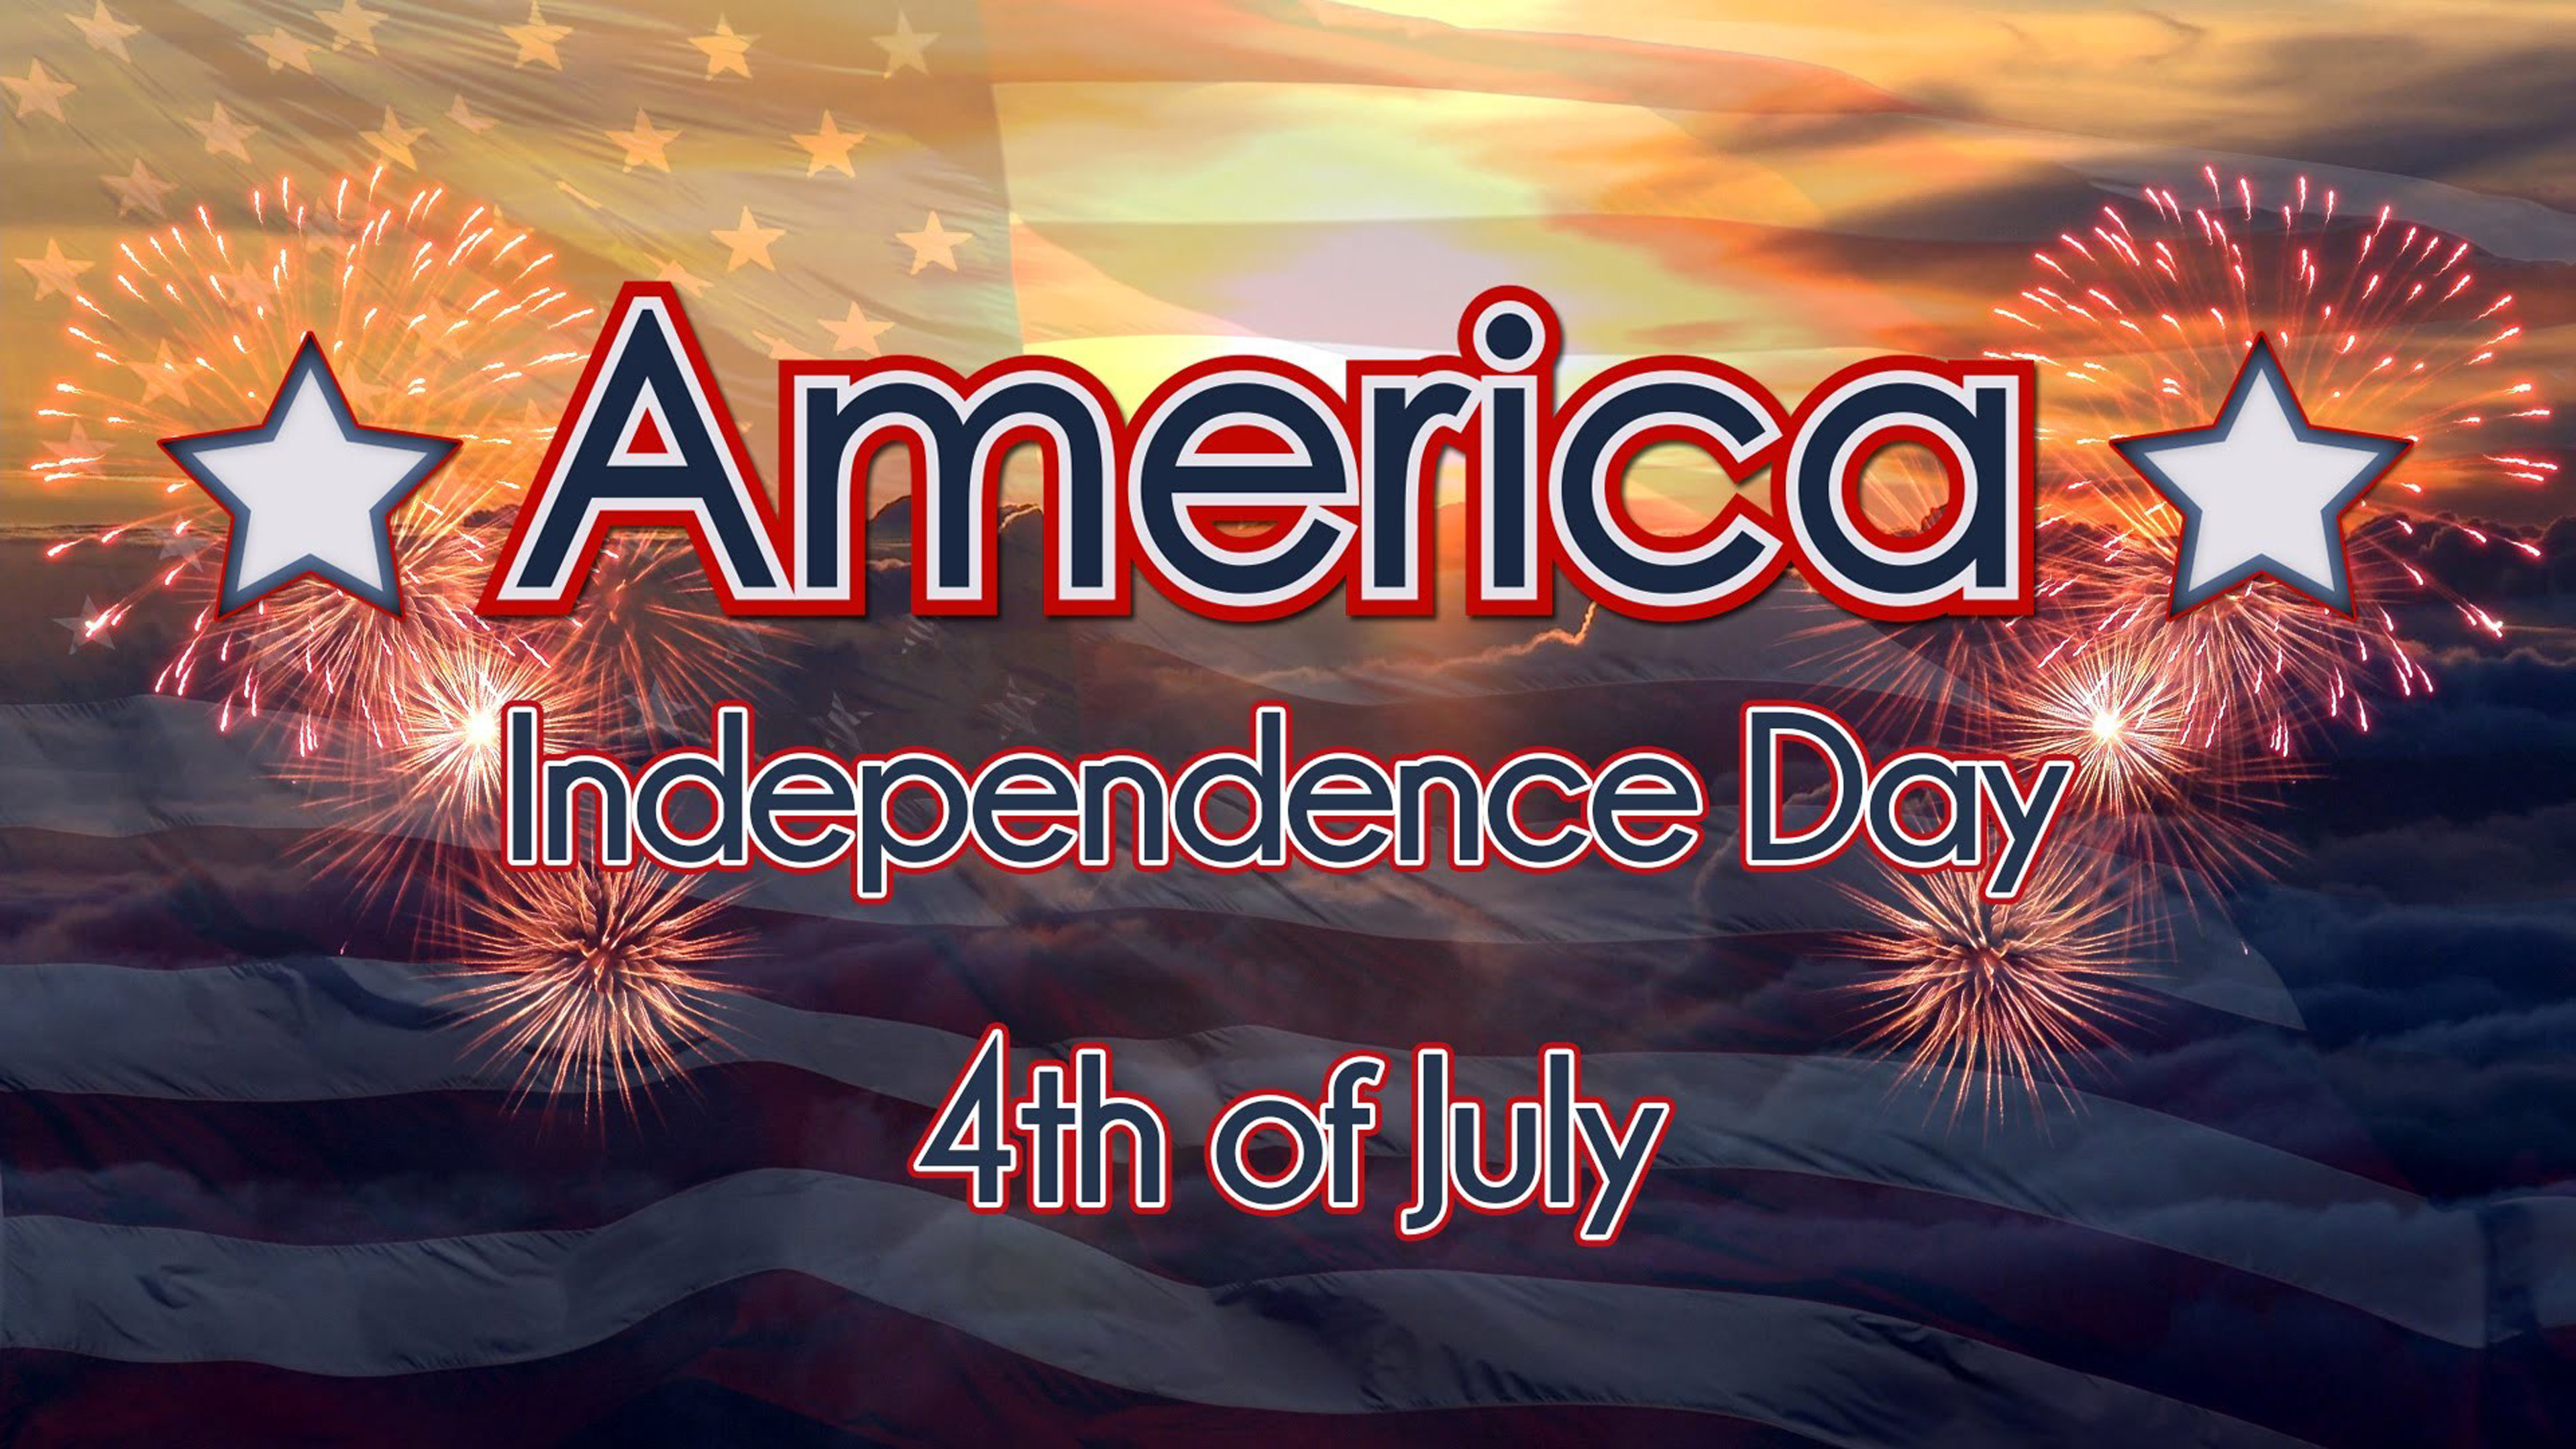 4th July Independence Day Federal Holiday In The United States Android